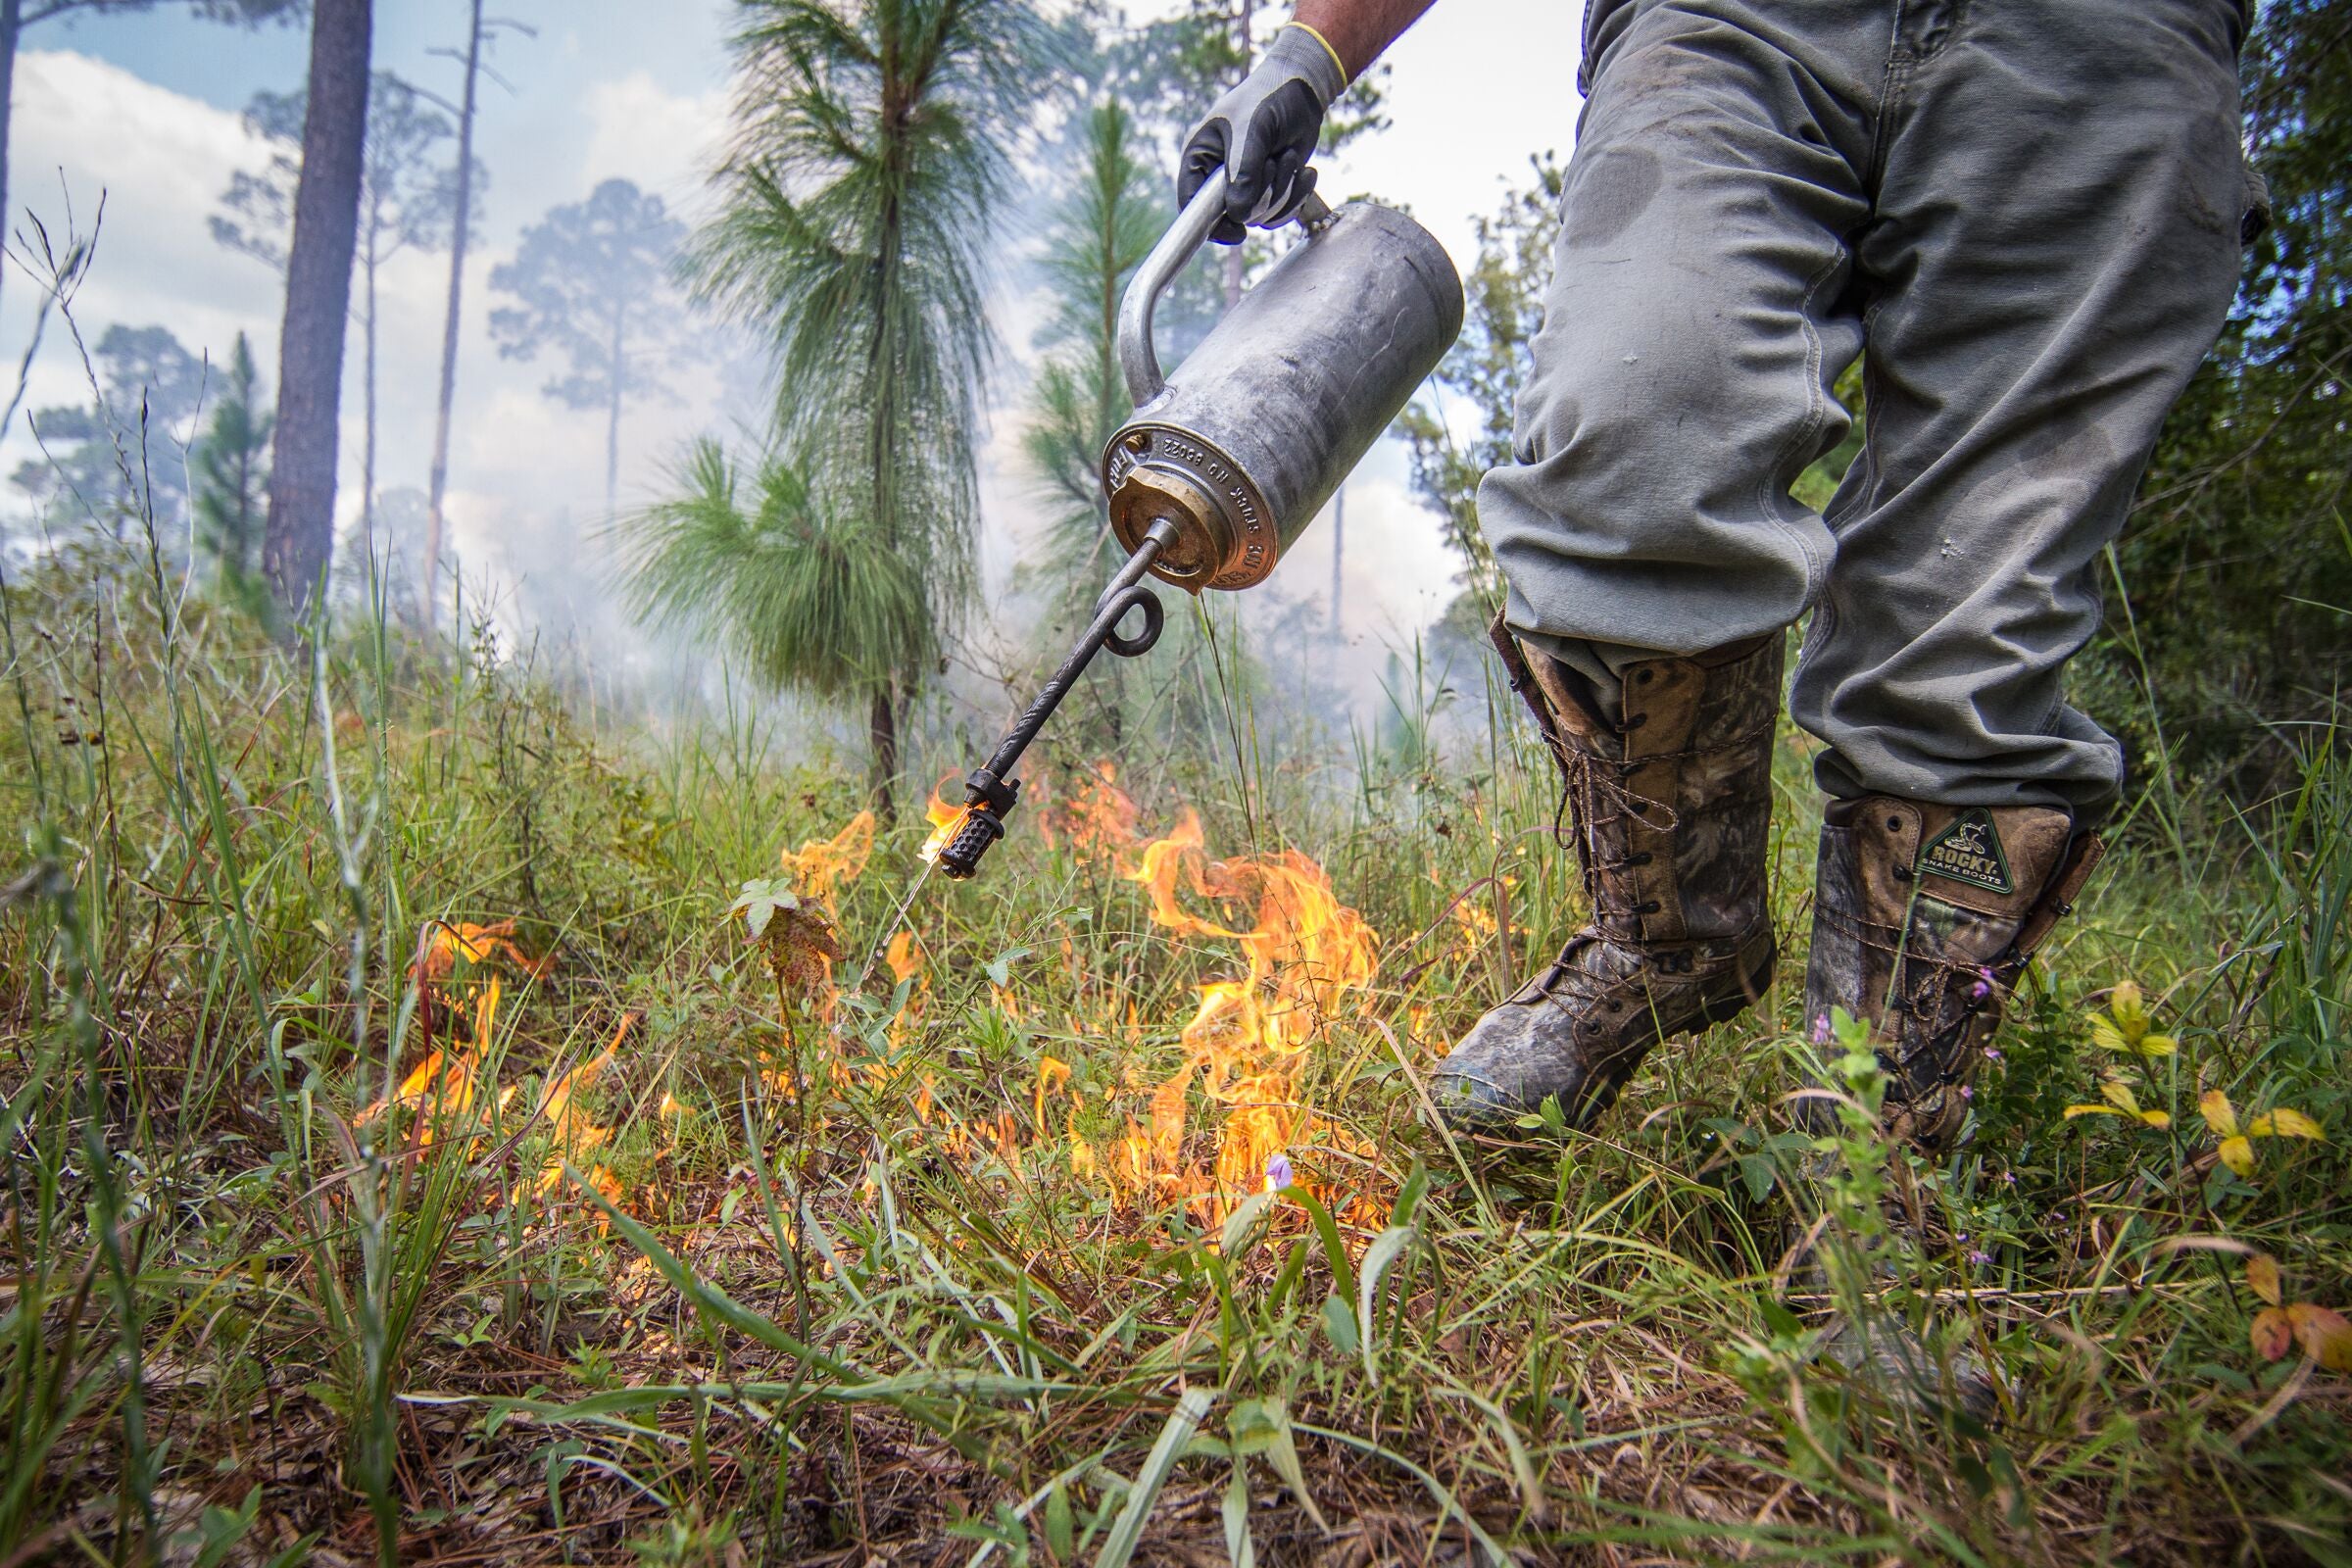 Prescribed Burn Planned at Gulf State Park in August